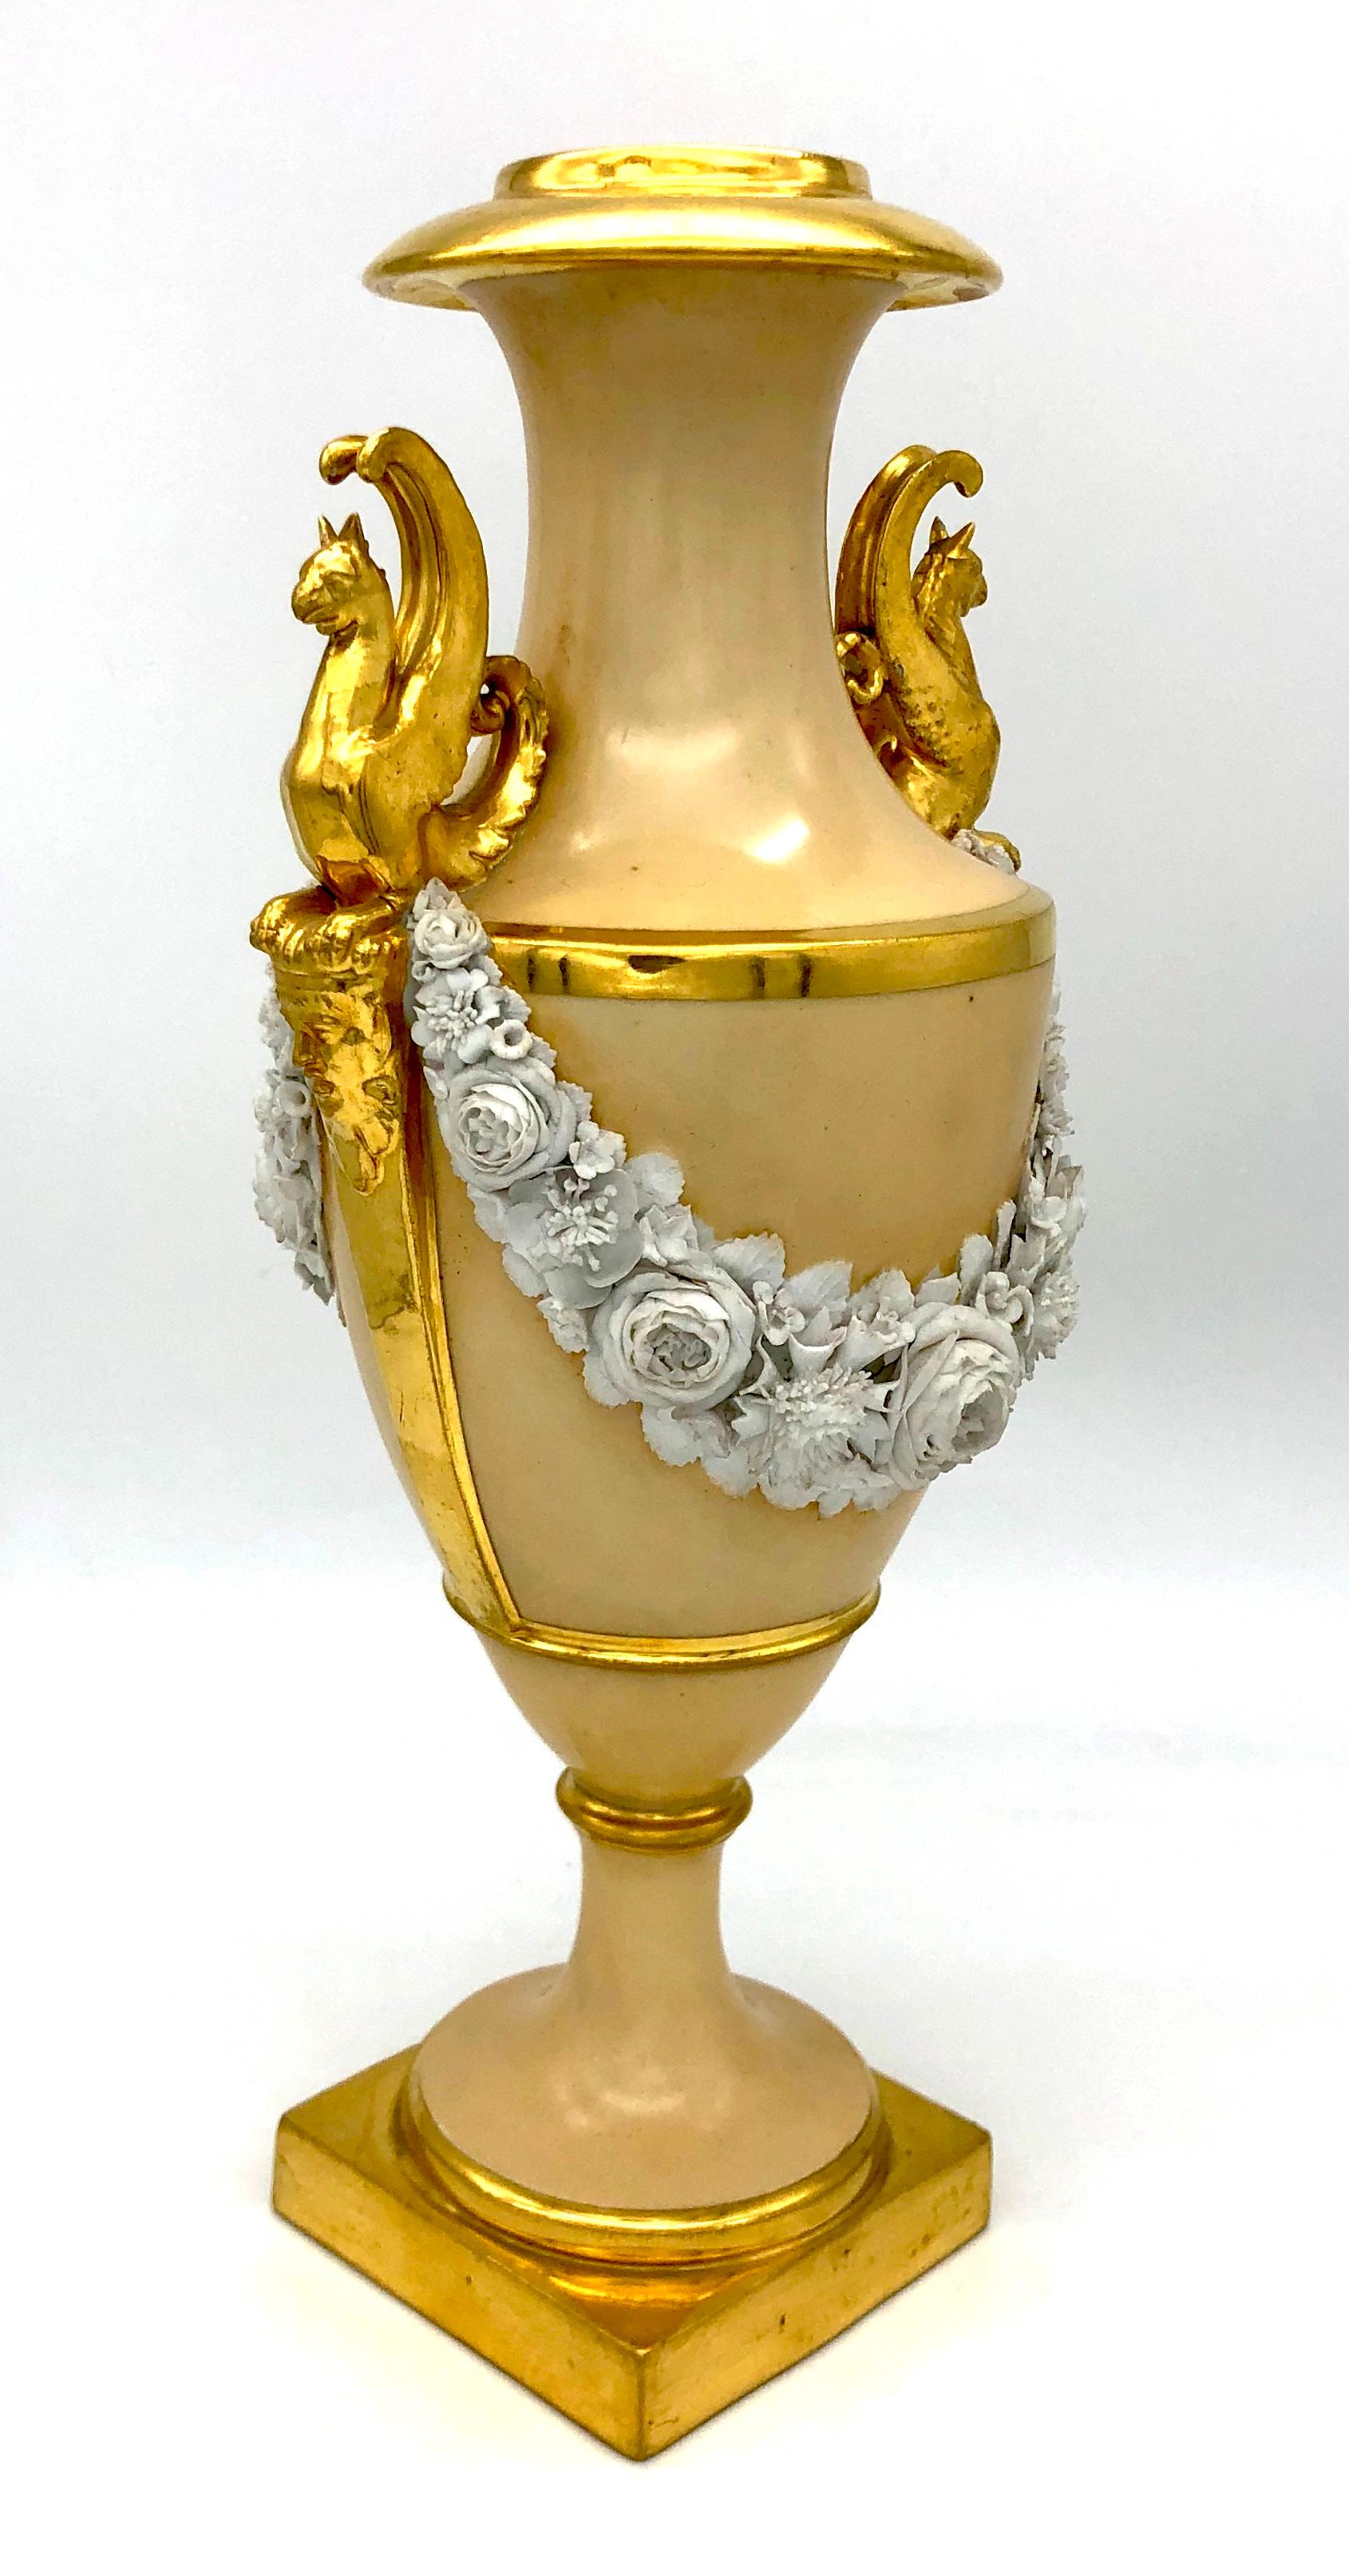 This very high quality French vase in caramel hue with guilding is most probably made by the Nast Porcelain Manufacture ( 1754 - 1817 ). It's handles are designed in the shape of two gilt griffins who rest their paws on young men's faces. The vase